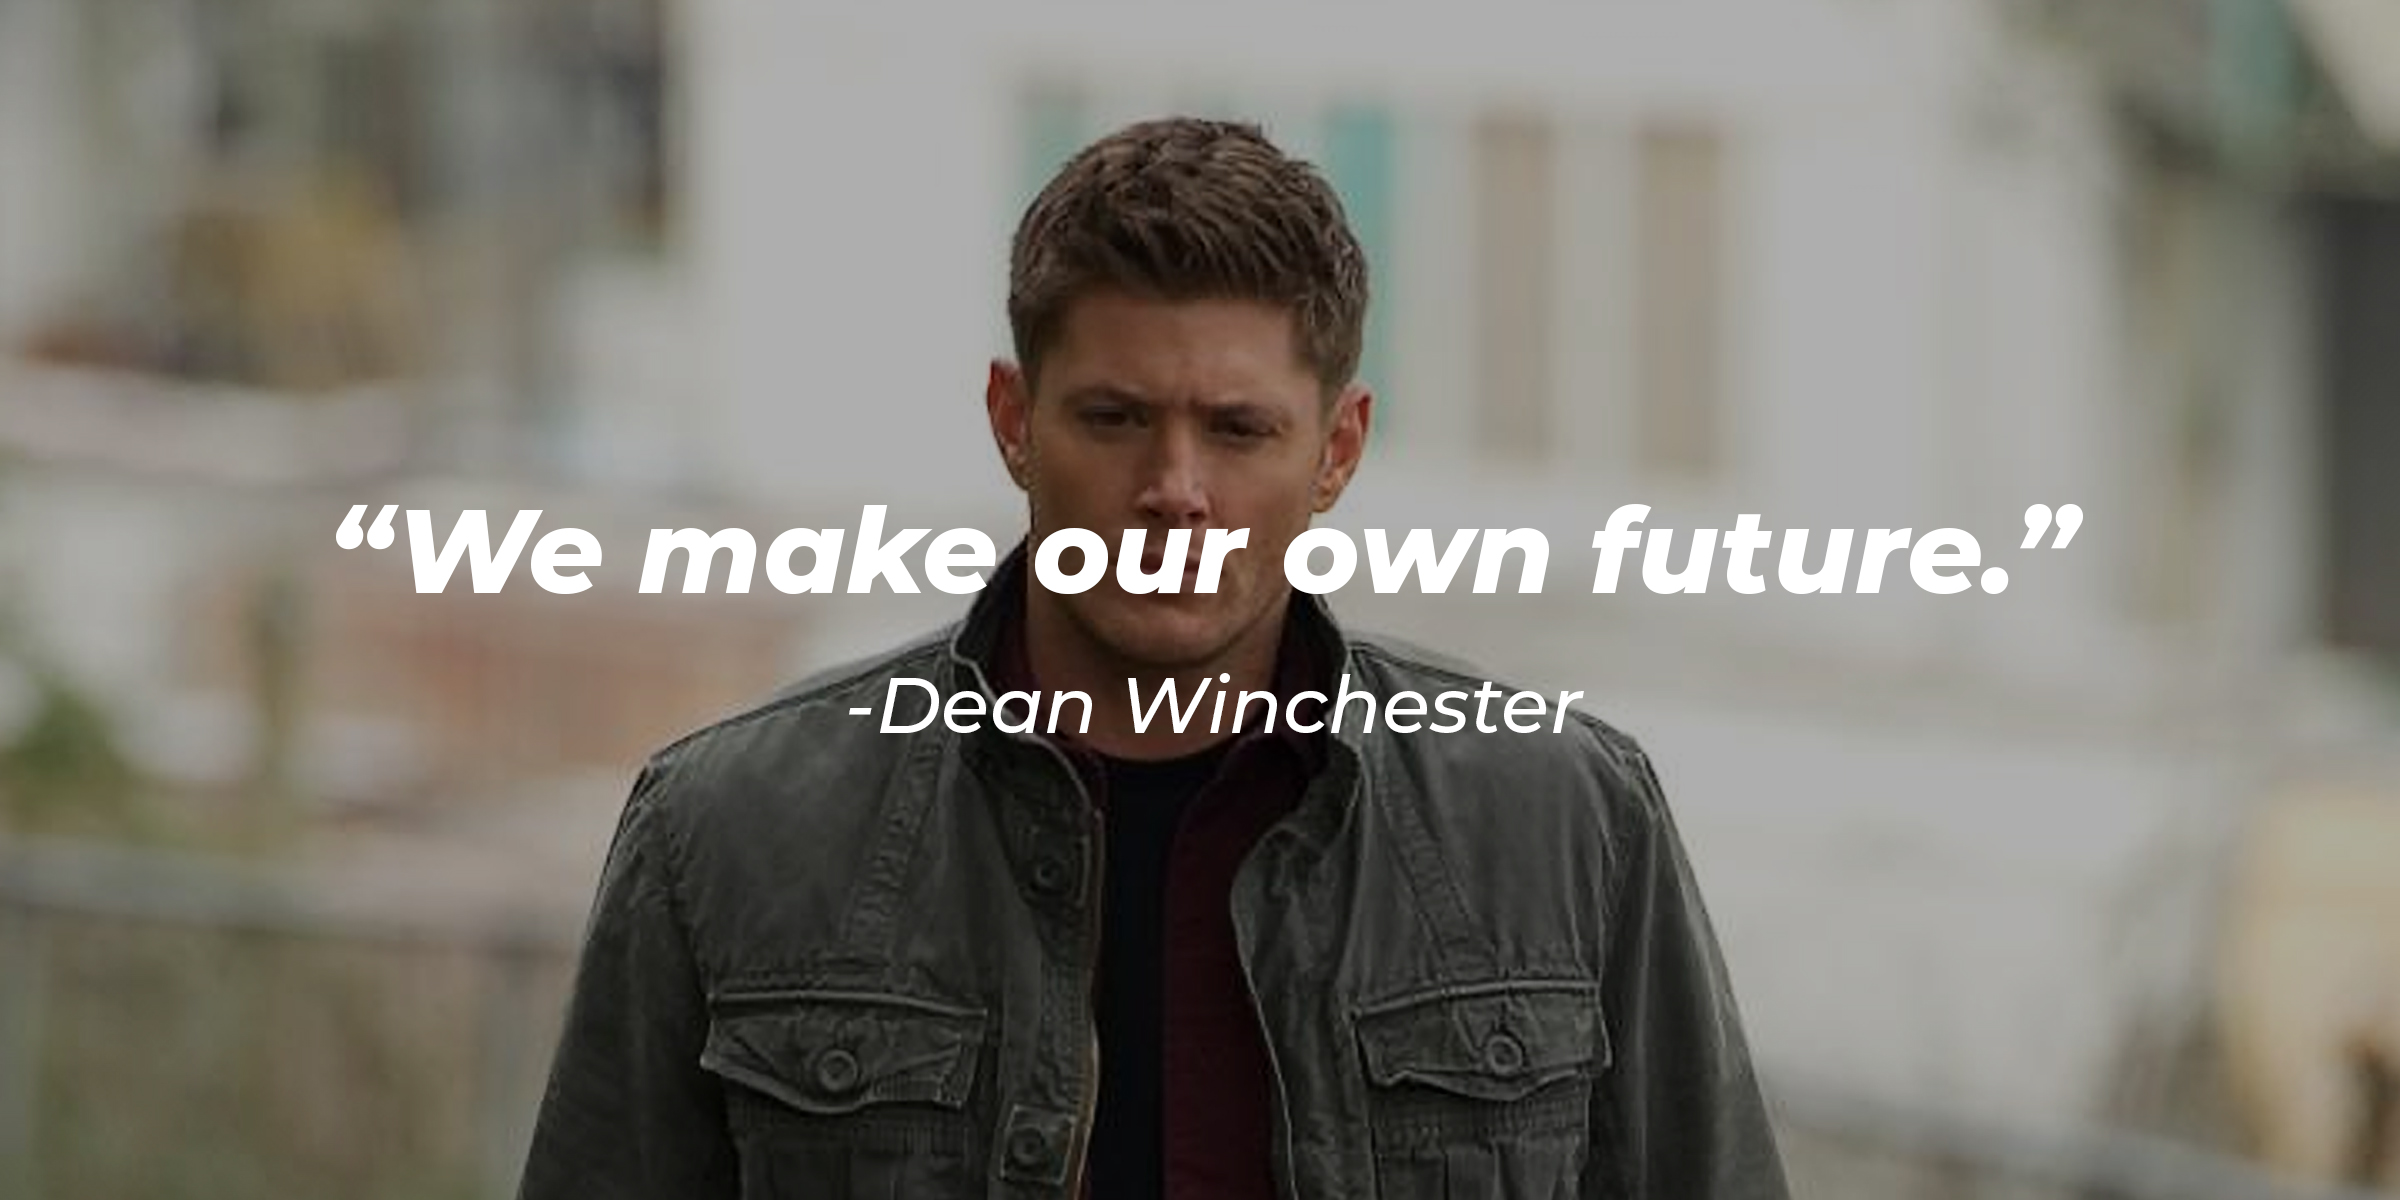 Dean Winchester, with his quote: “We make our own future.” | Source: Facebook.com/Supernatural